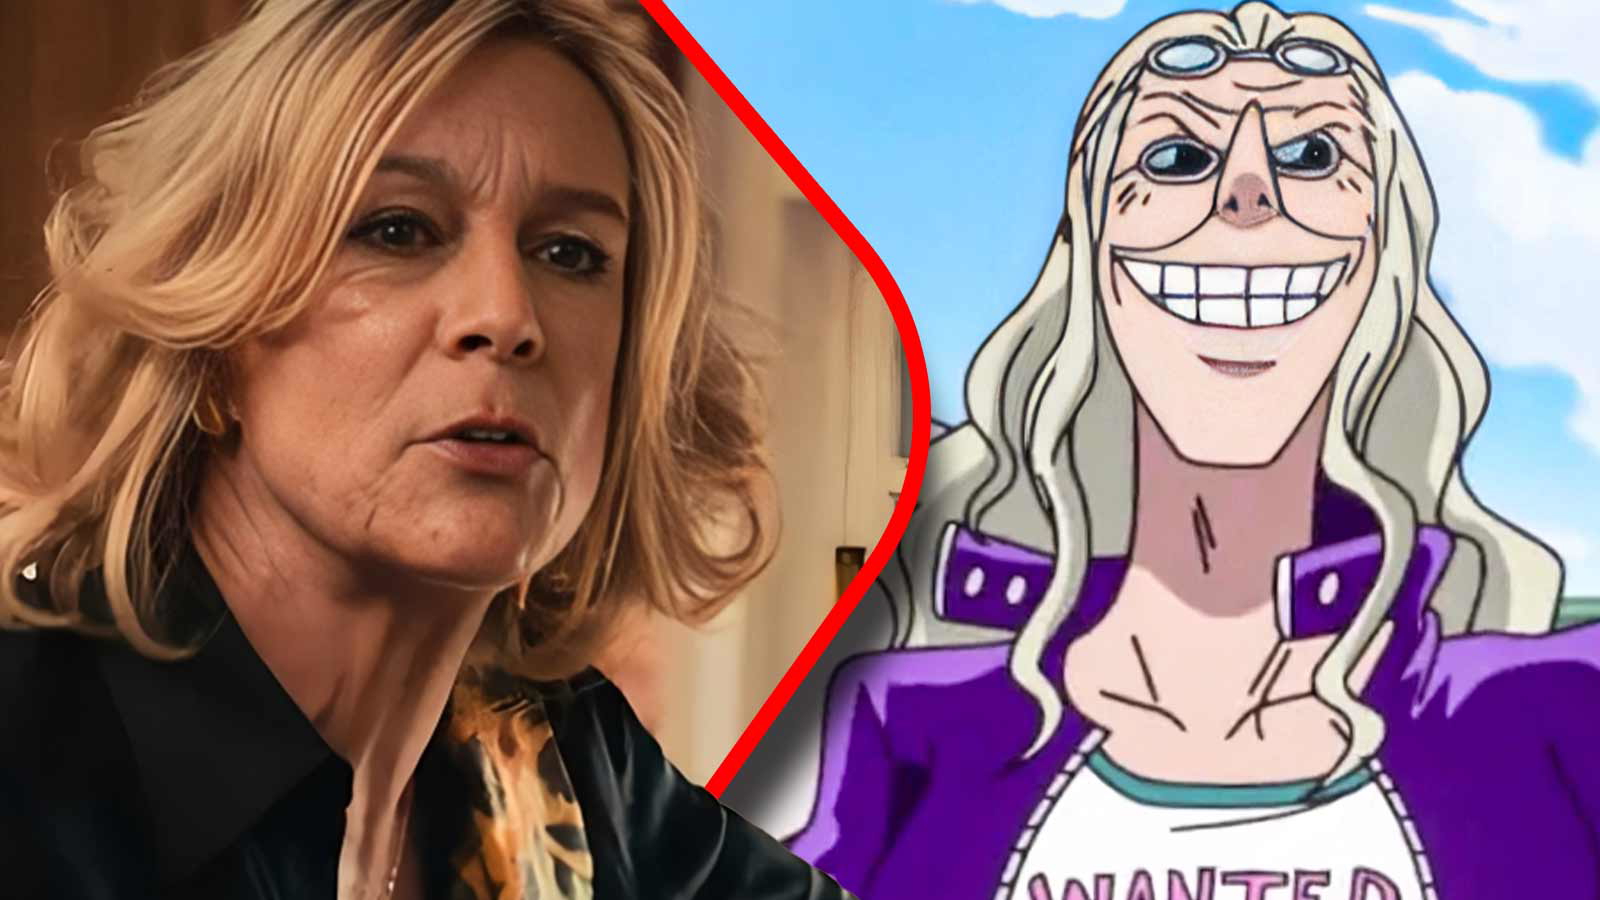 “She was perfect for this role”: Jamie Lee Curtis Will No Longer Make Her One Piece Live Action Debut as Doctor Kureha